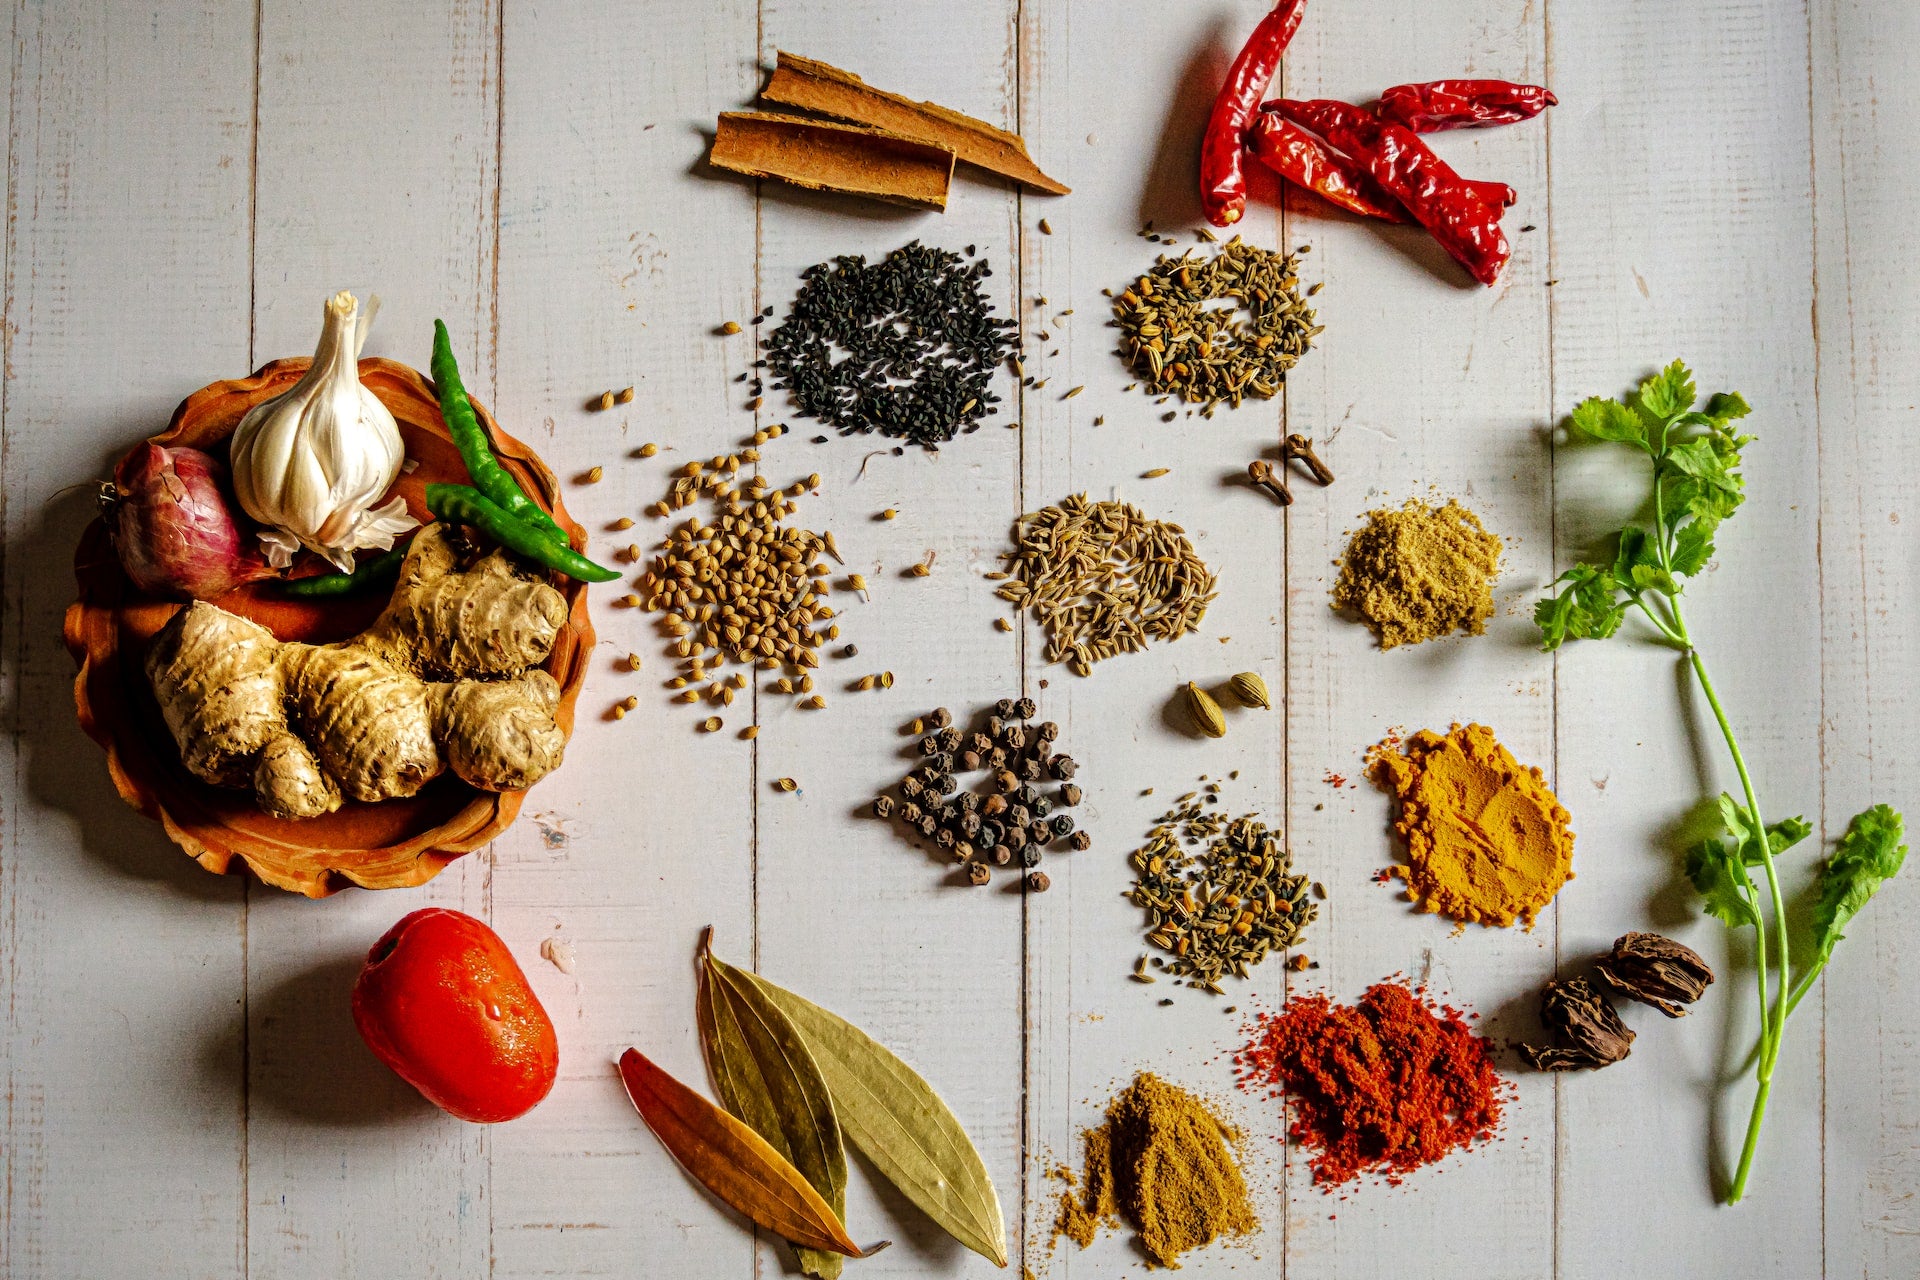 WHAT DO SPICES ADD TO FOOD AND TO COOKING?